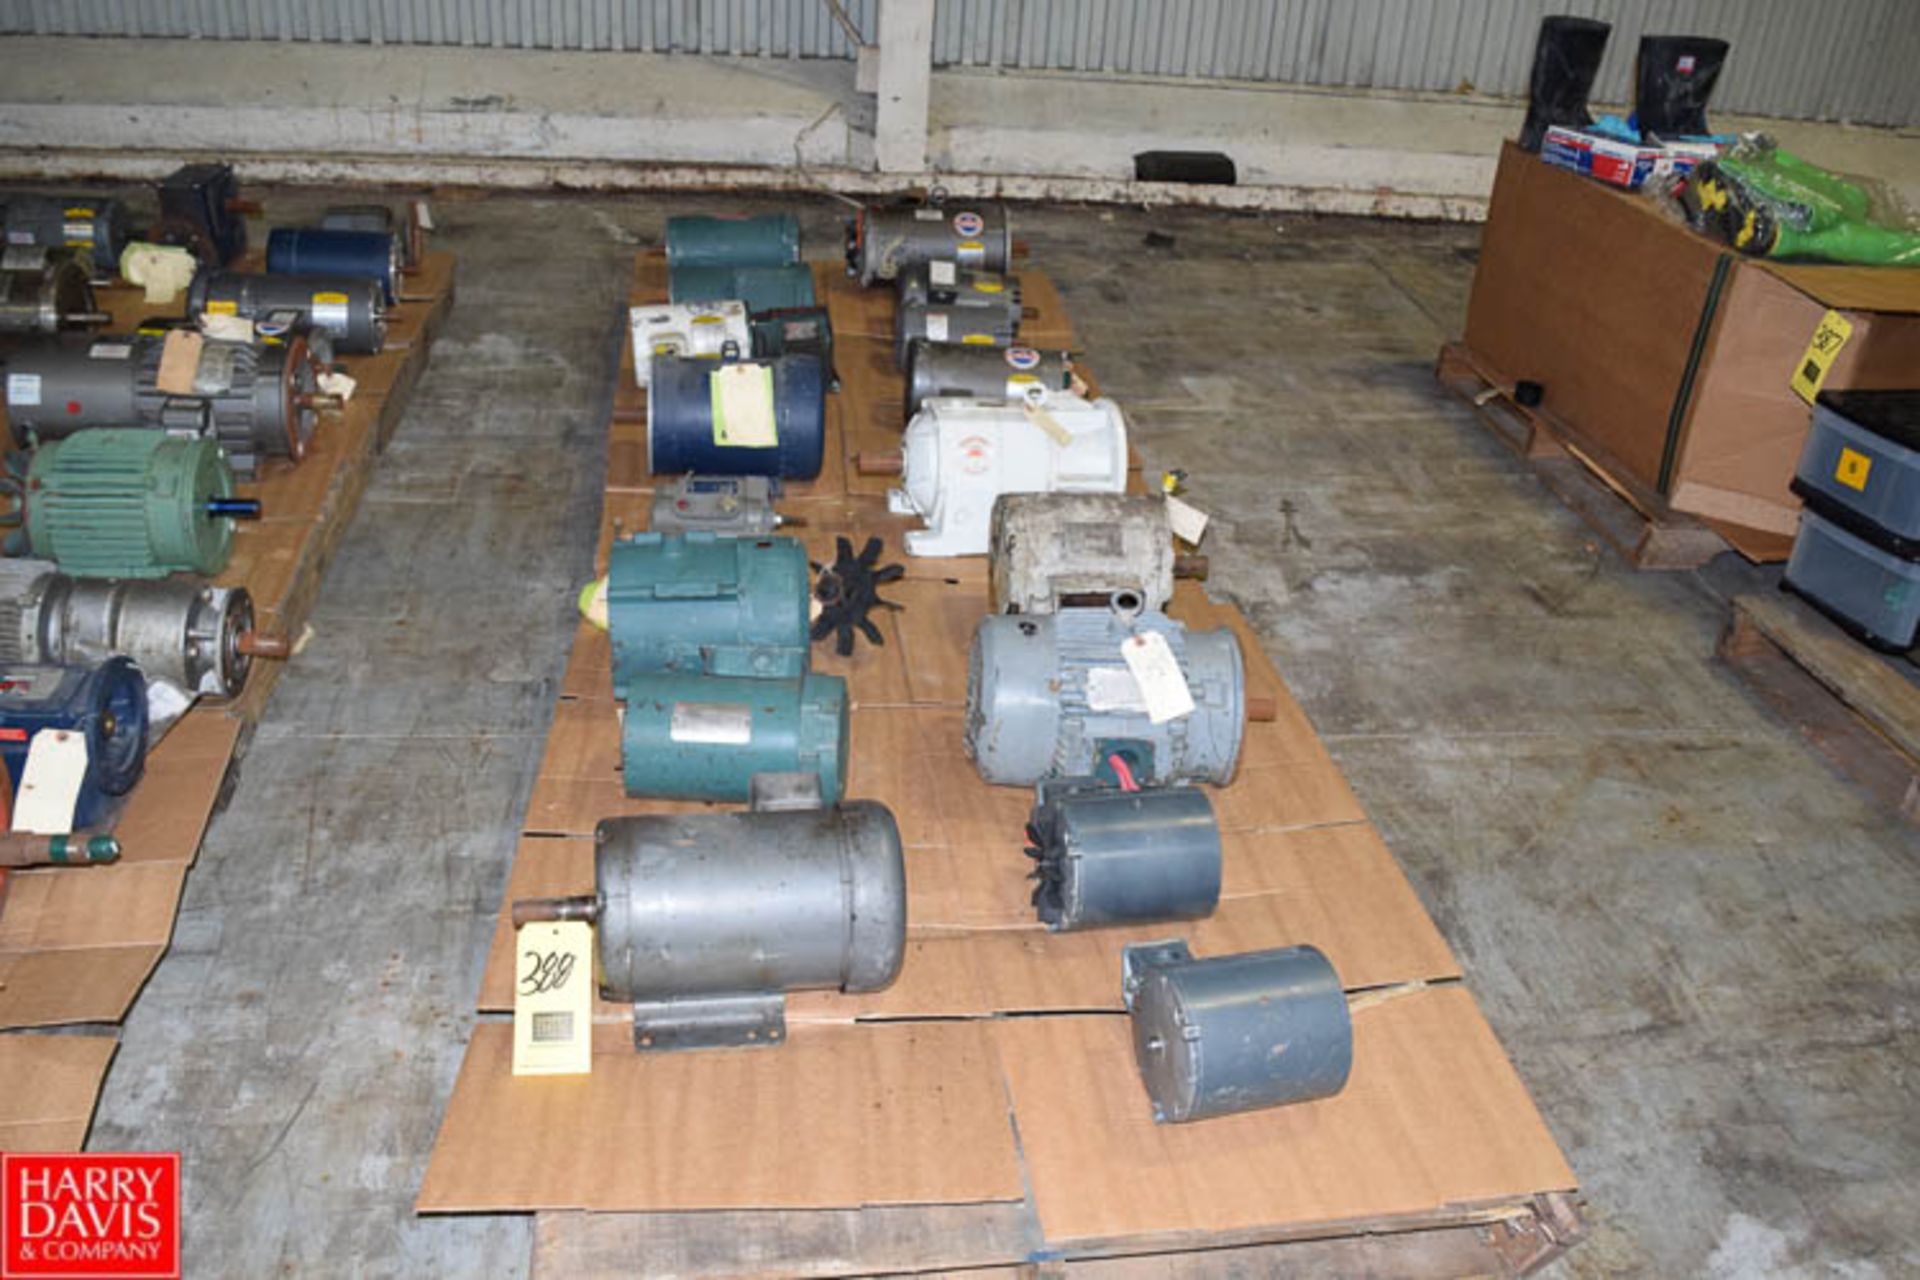 Assorted Baldor and Reliance Motors (Up to 7.5 HP) - Rigging Fee: $ Please Contact Rigger for